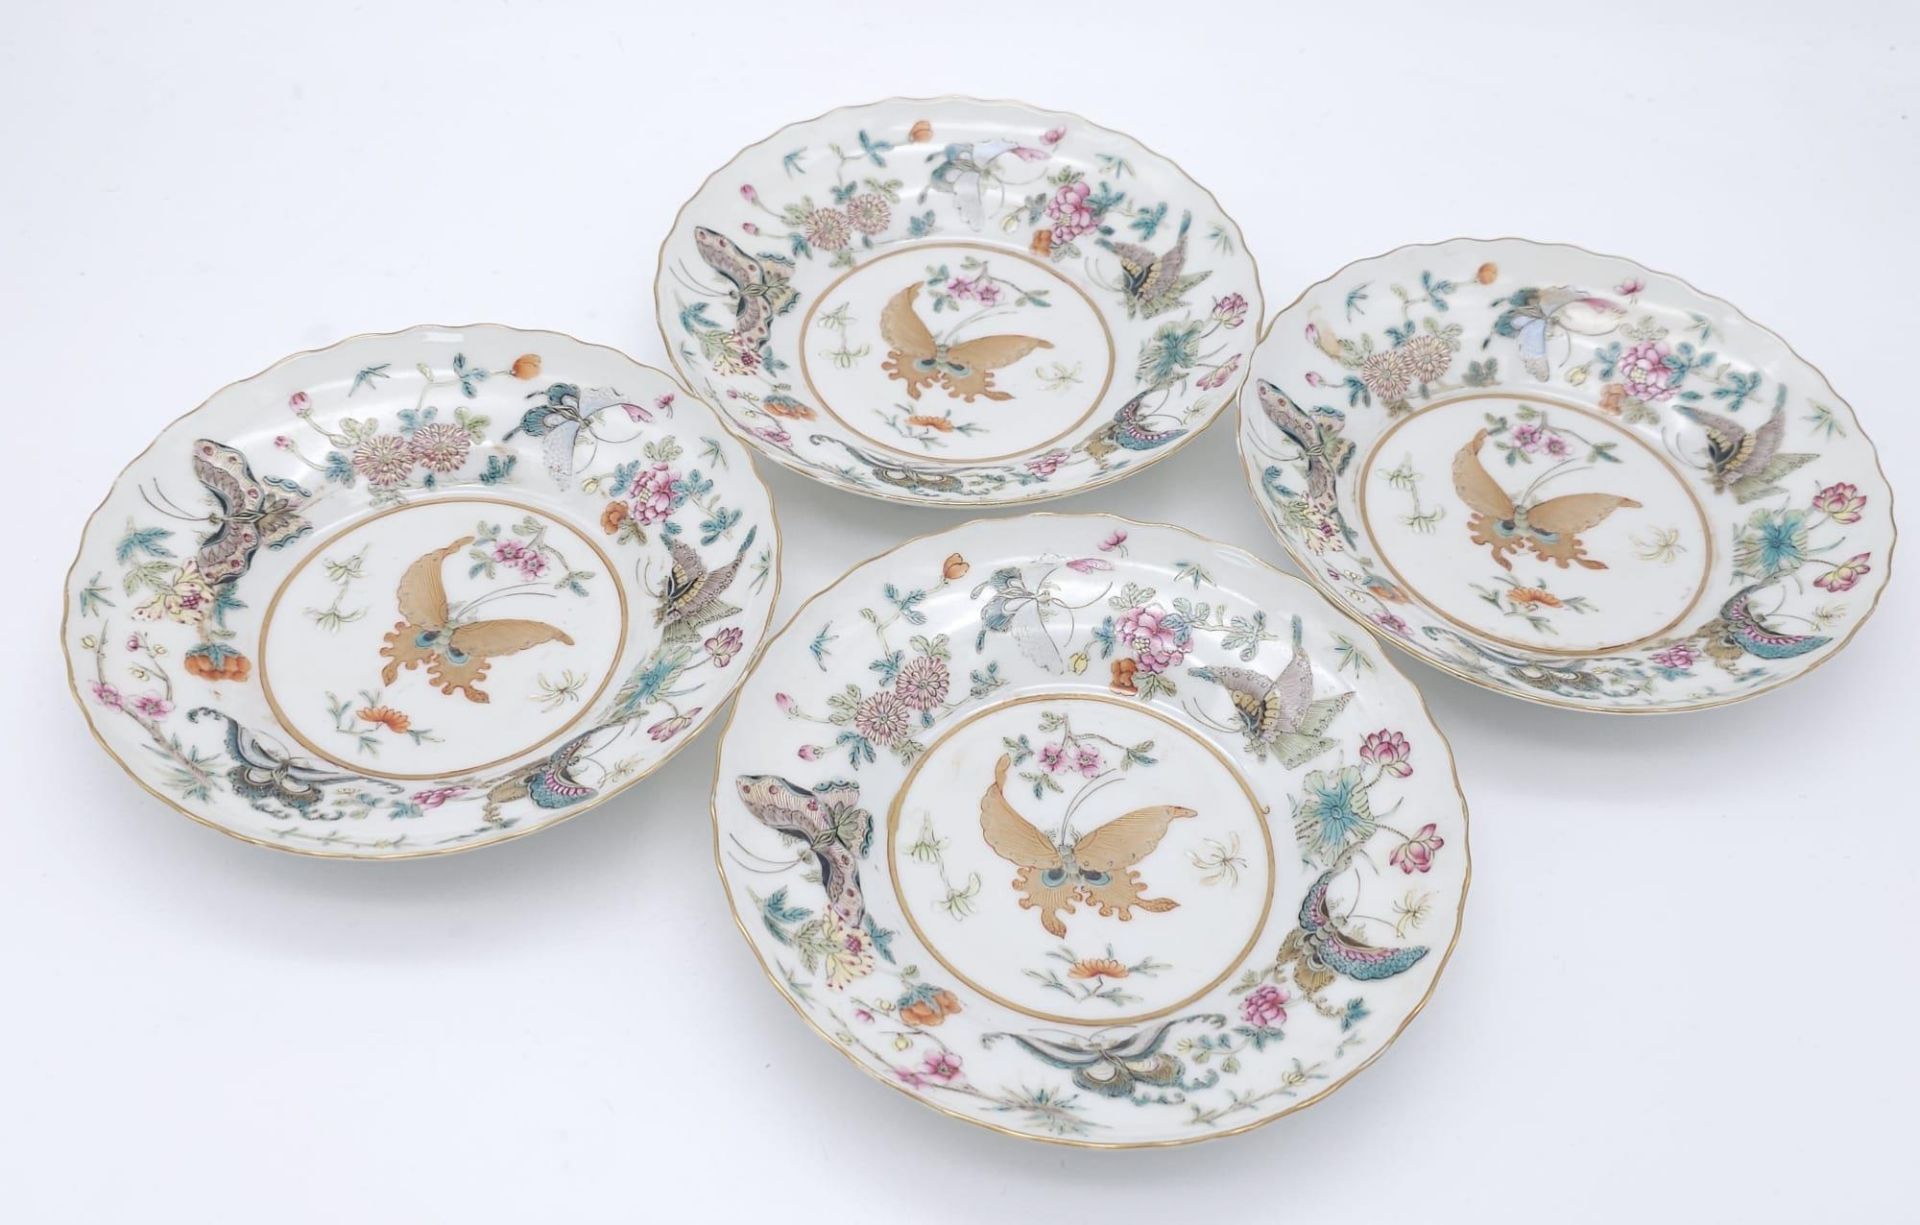 A set of 4 Daoguang (1820-1850) Era Dishes. Beautifully decorated with a iridescent floral & - Image 2 of 23